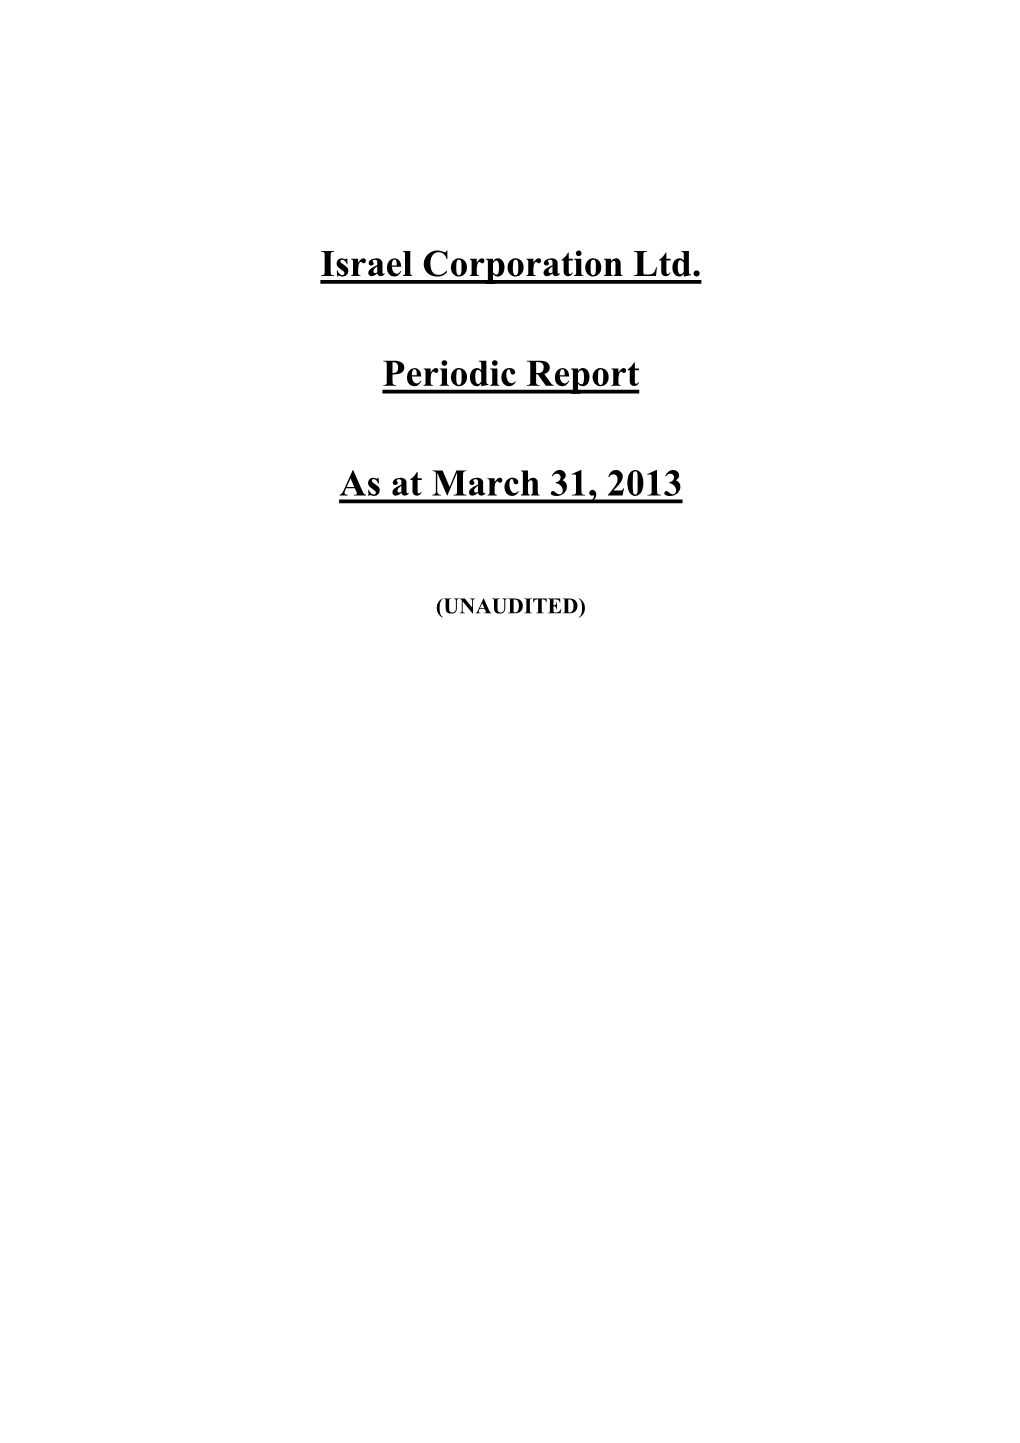 Israel Corporation Ltd. Periodic Report As at March 31, 2013